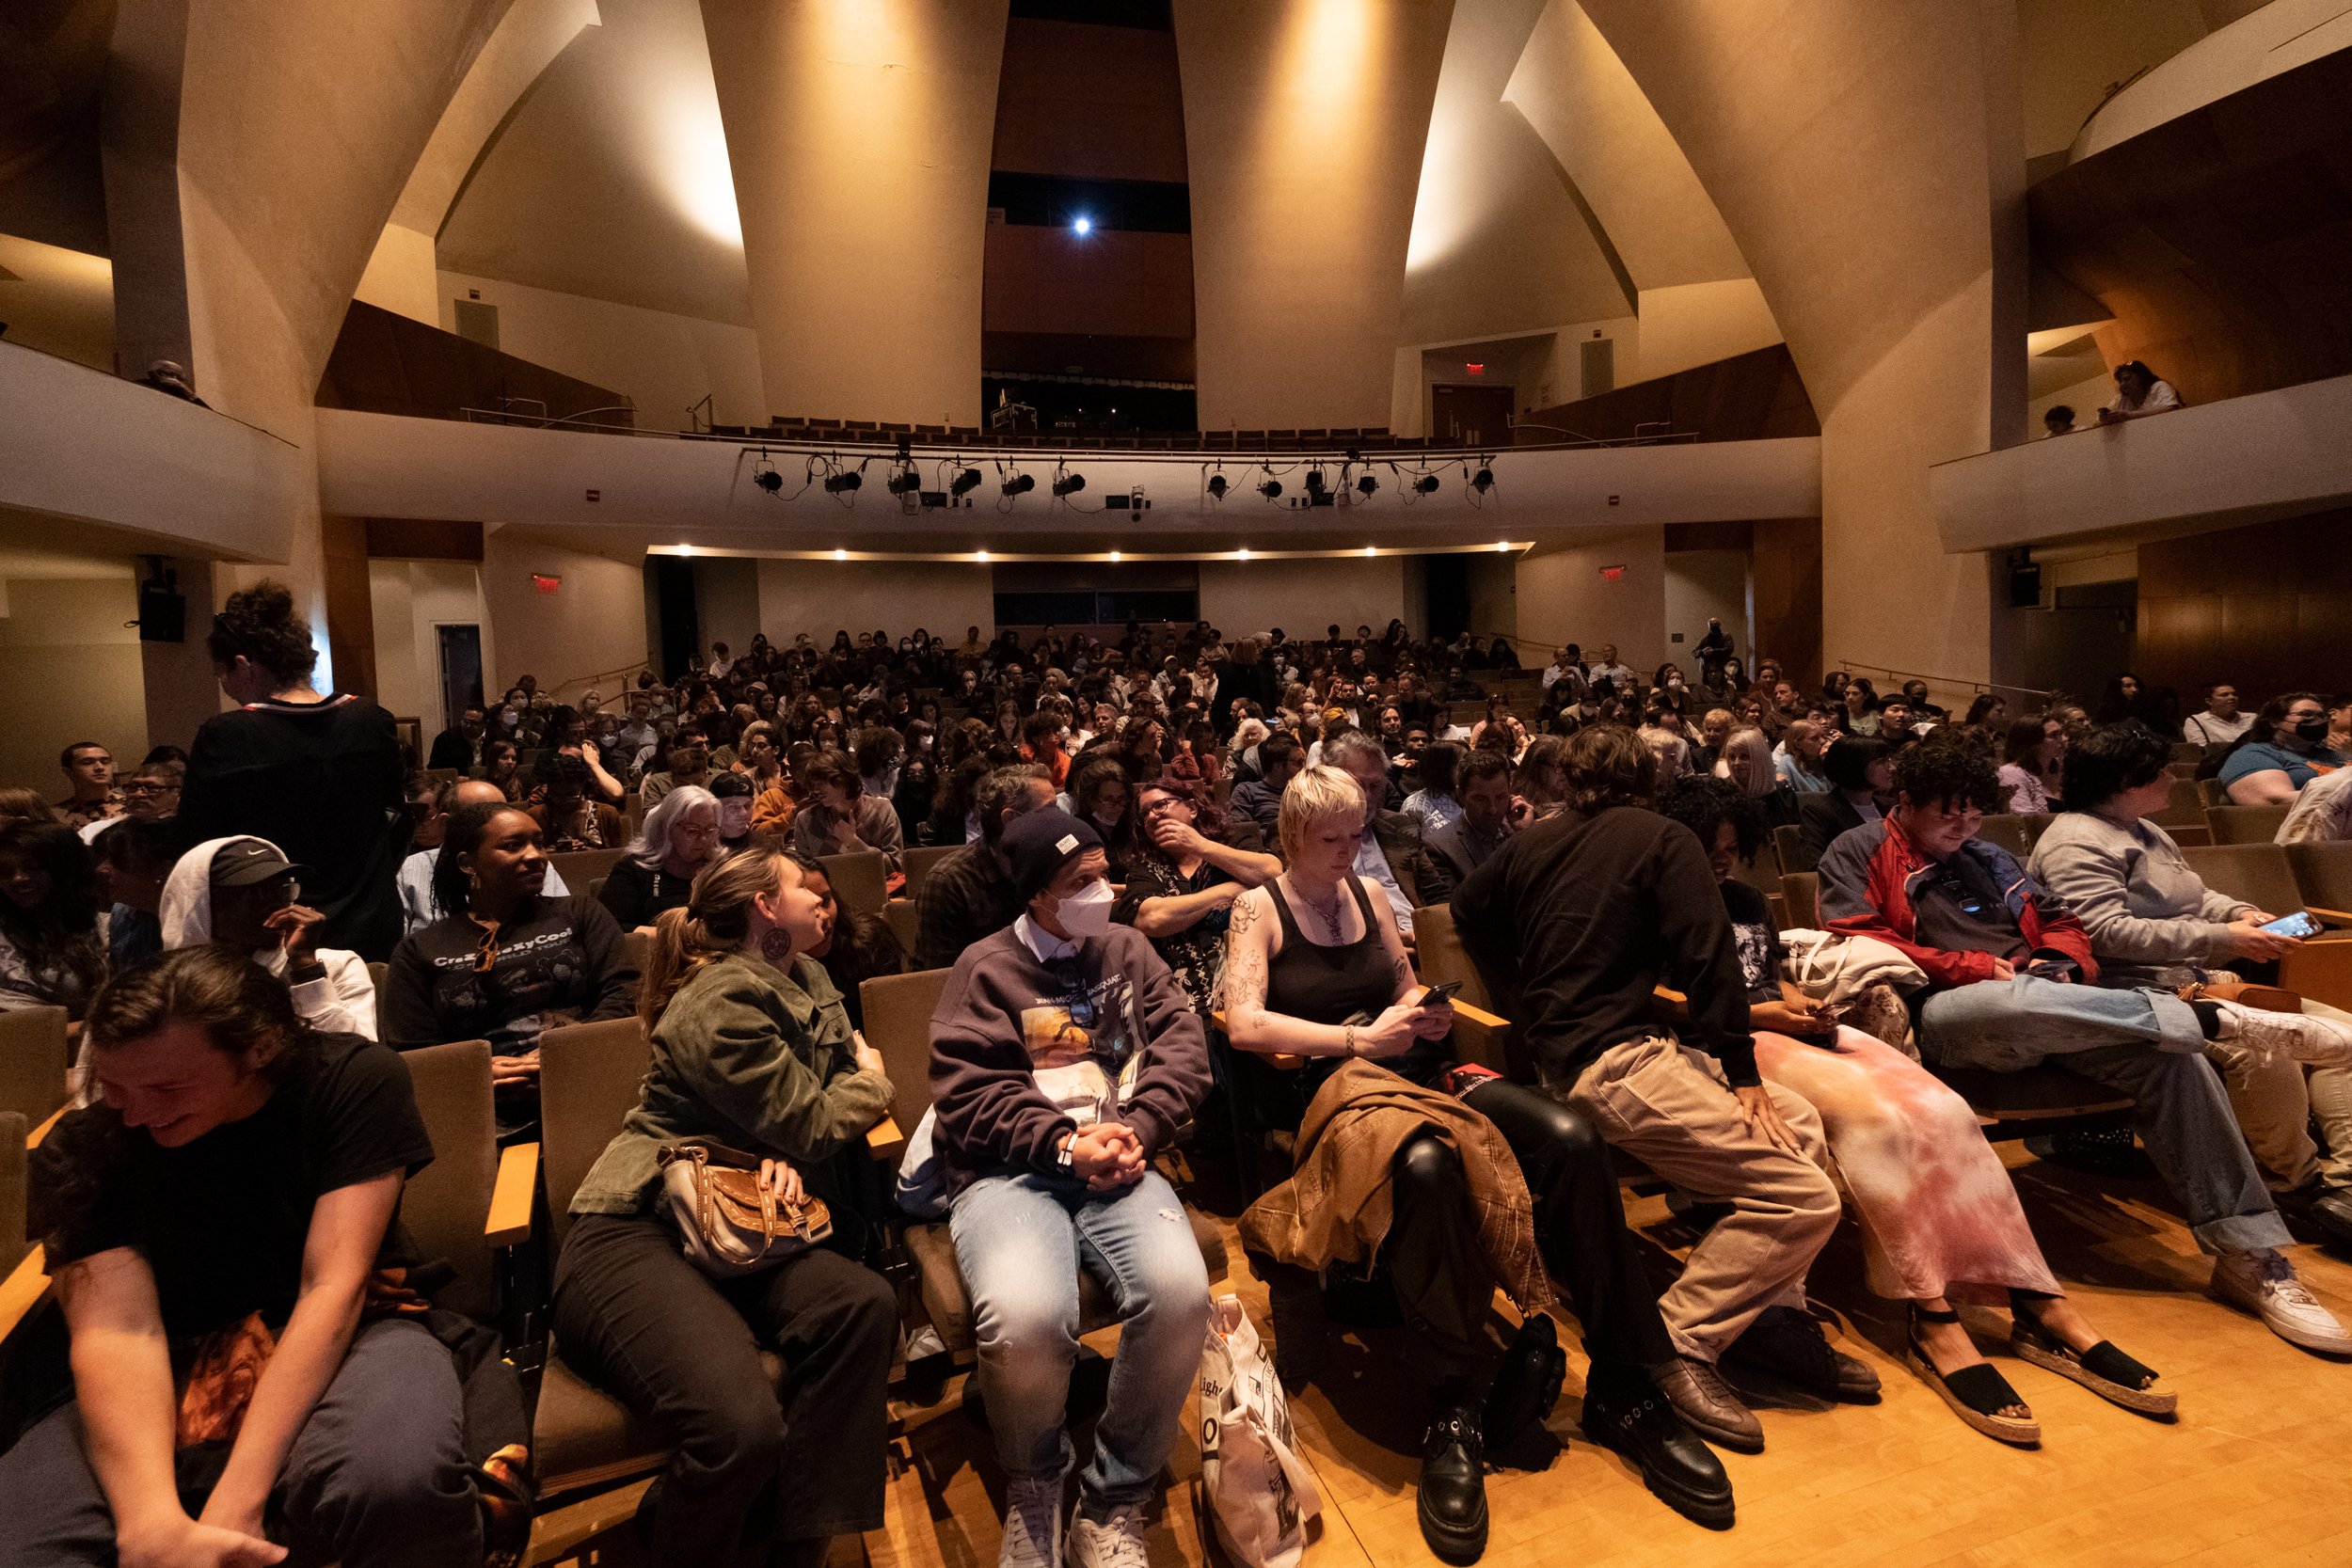  The Eli and Edythe Broad Stage at the Santa Monica College (SMC) Performing Arts Center is packed with a full house on Monday, May 8th, 2023. They are anticipating Matika Wilbur, author of "Project 562, Changing The Way We See Native America" giving